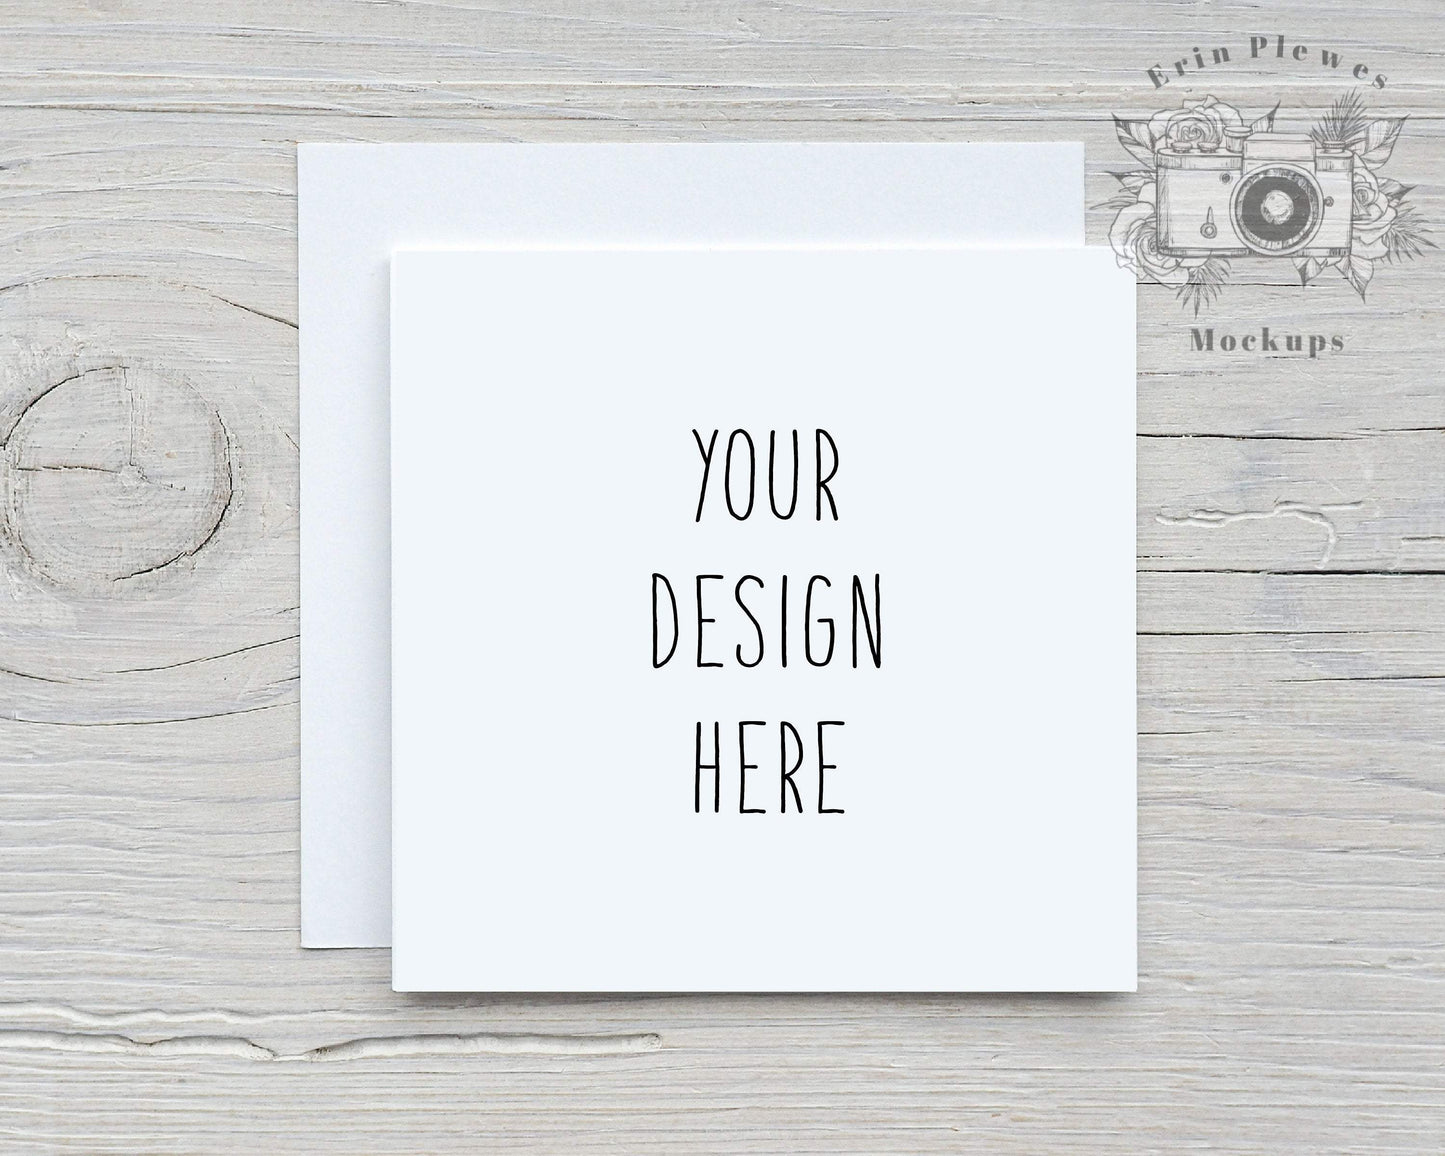 Erin Plewes Mockups Square Card Mockup with White Envelope, Square Invitation Mock Up for Rustic Wedding, Lifestyle Stock Photo Jpeg Template